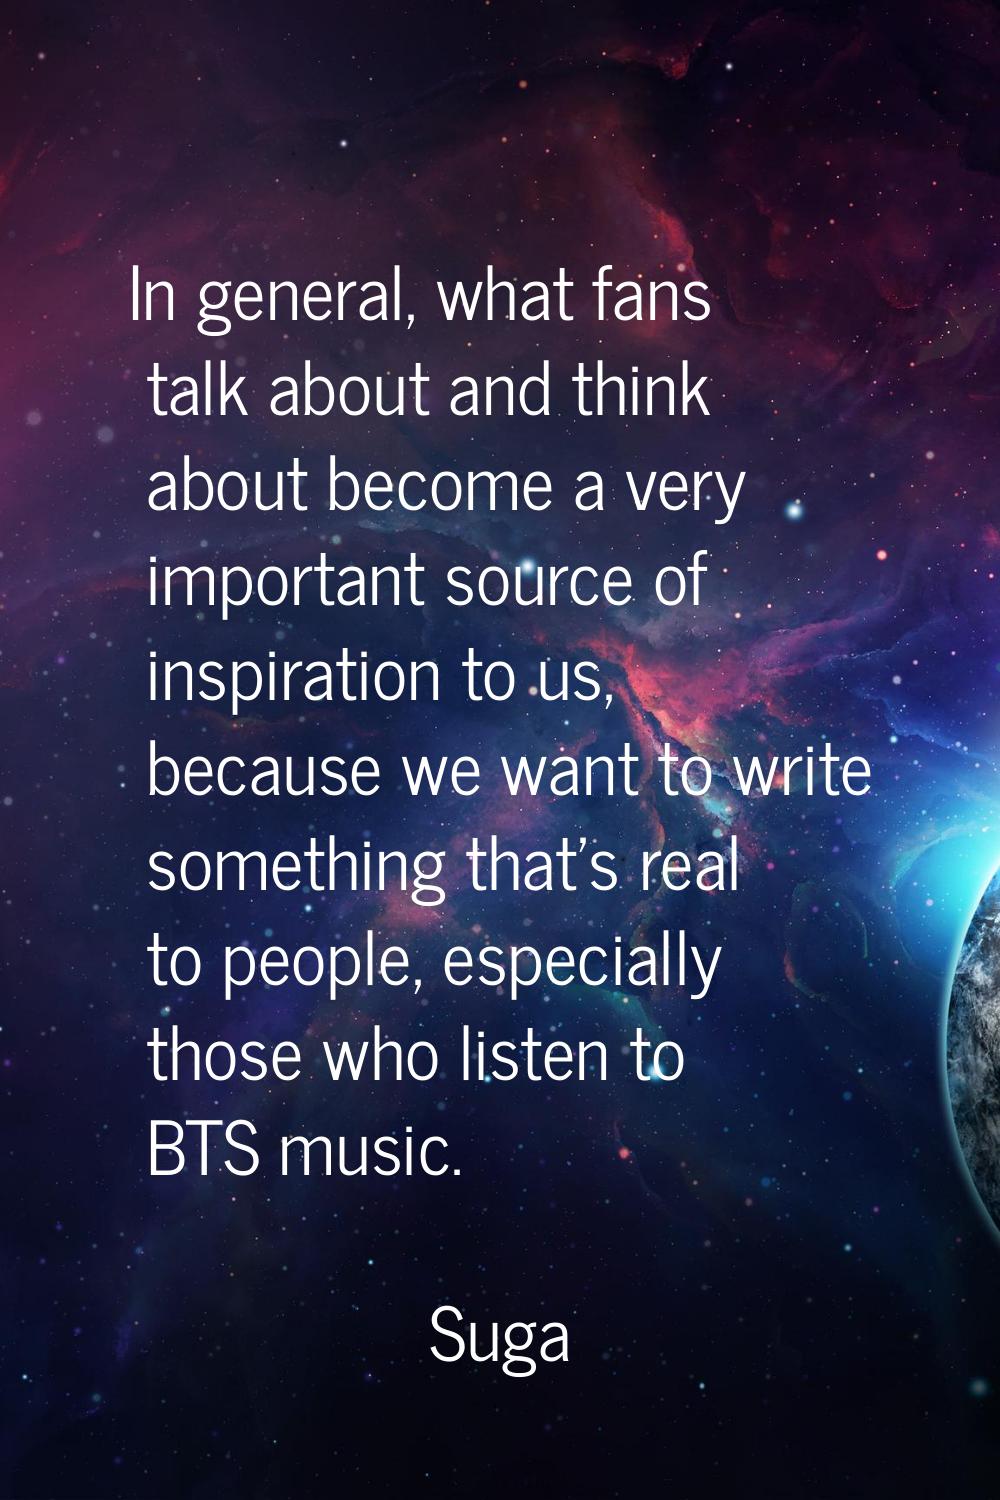 In general, what fans talk about and think about become a very important source of inspiration to u